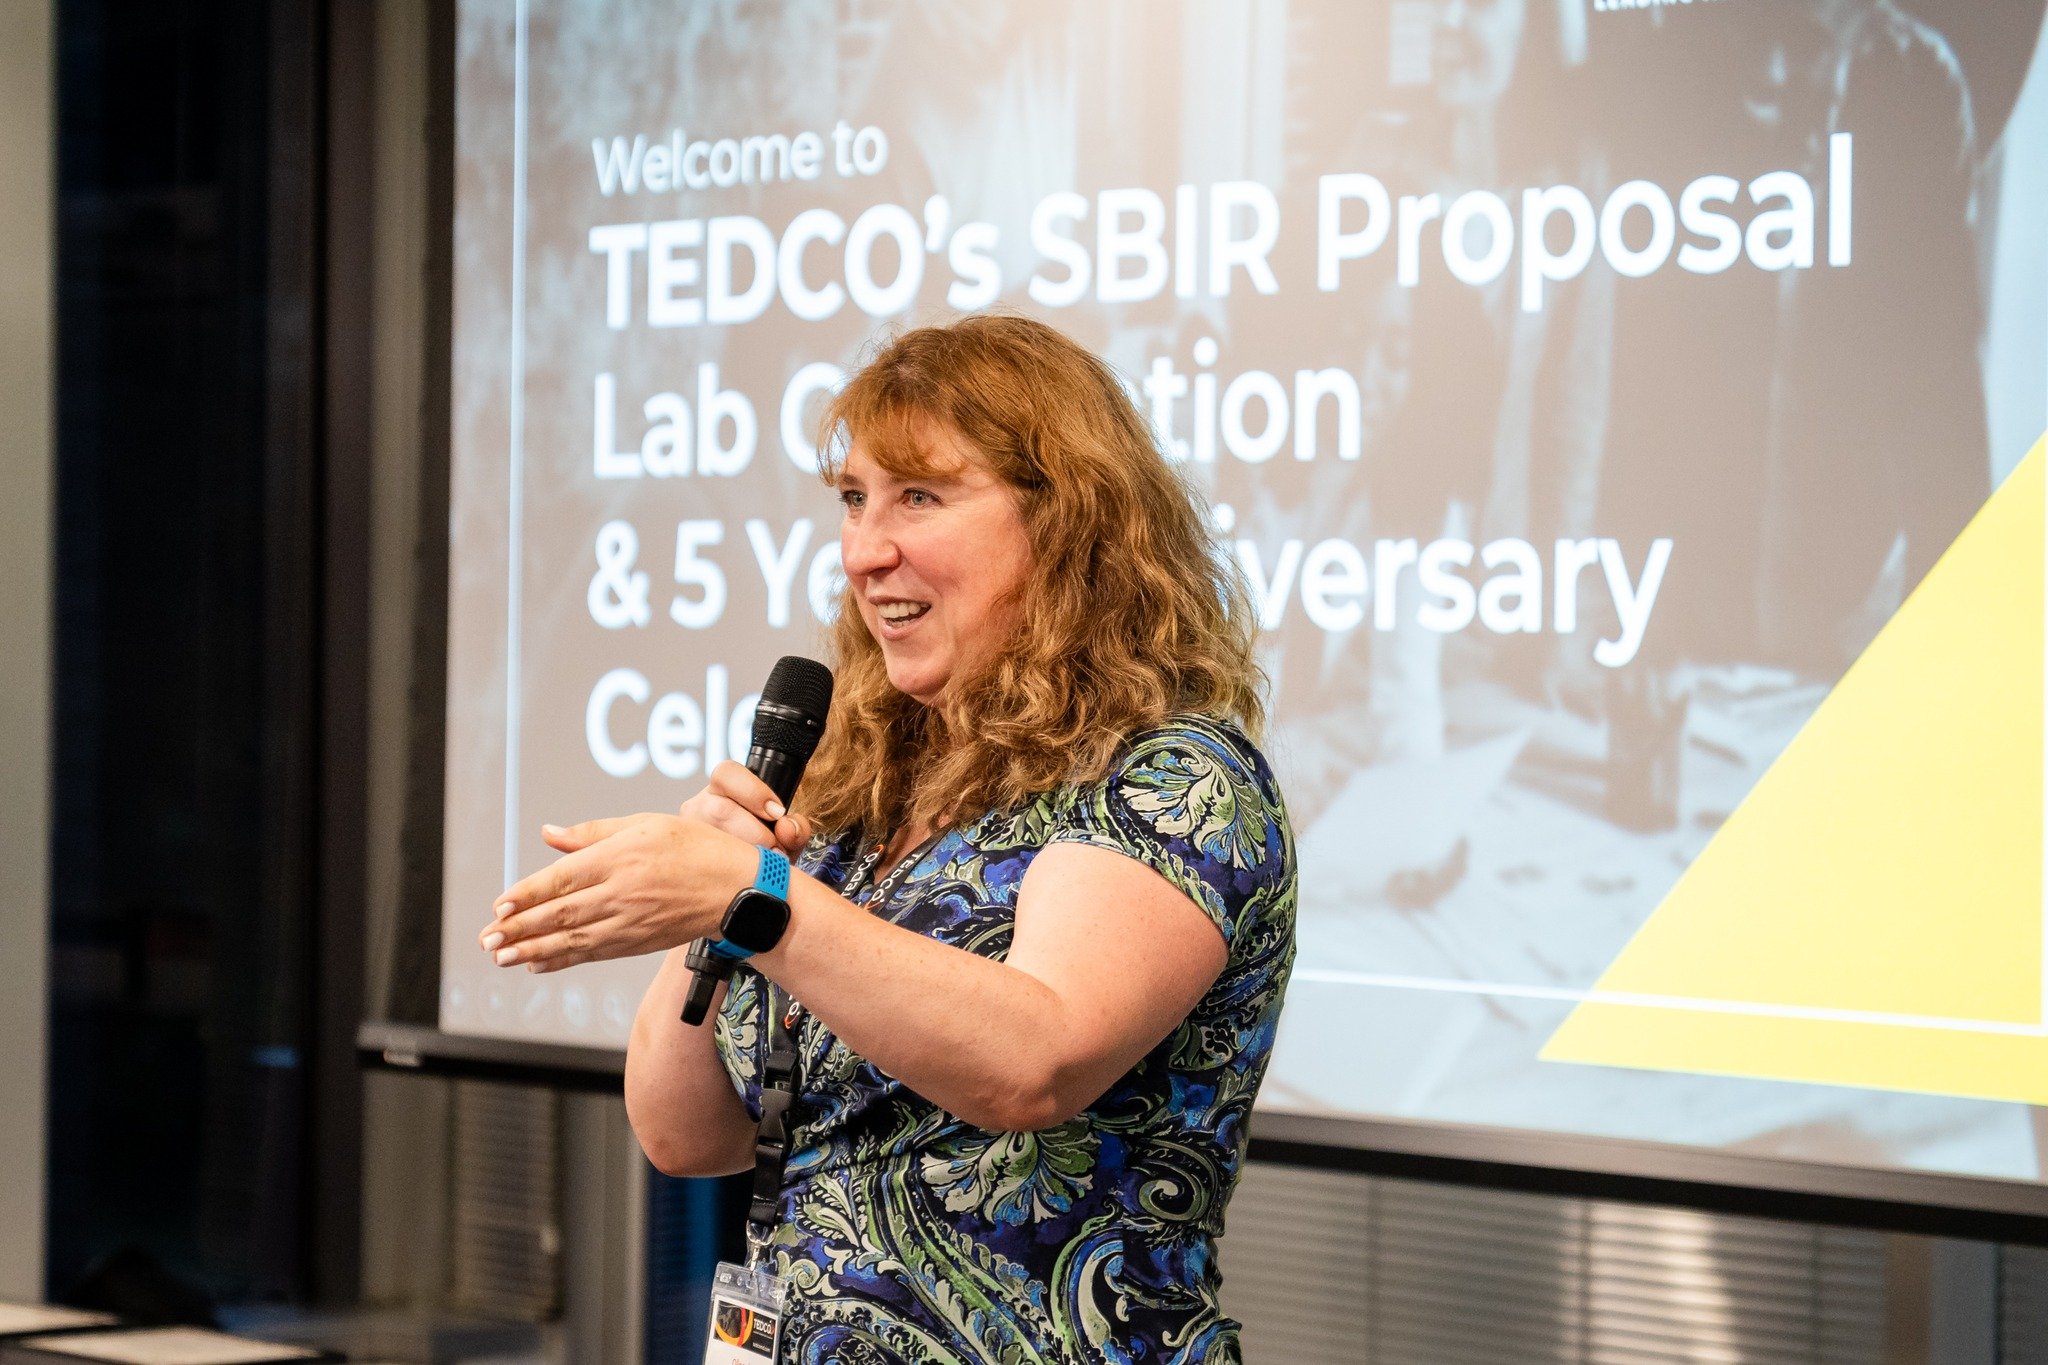 Celebrating Success: OST Global Solutions & TEDCO Mark the 5-Year Milestone of the SBIR Proposal Lab